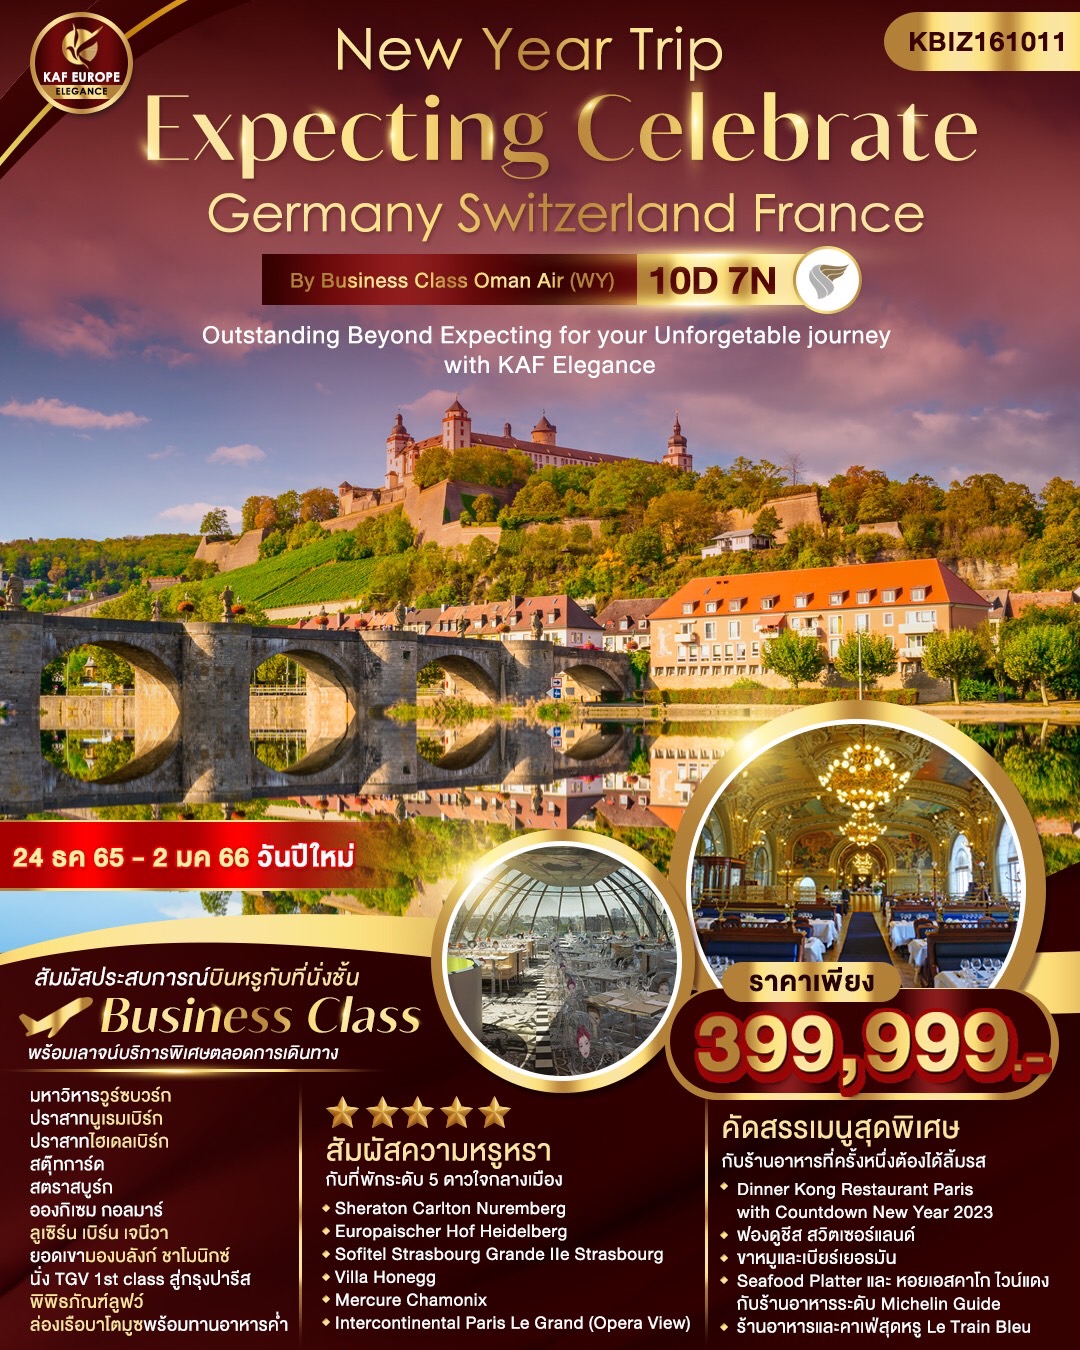 Germany Switzerland France 10D7N By Business Class Oman Air (WY)